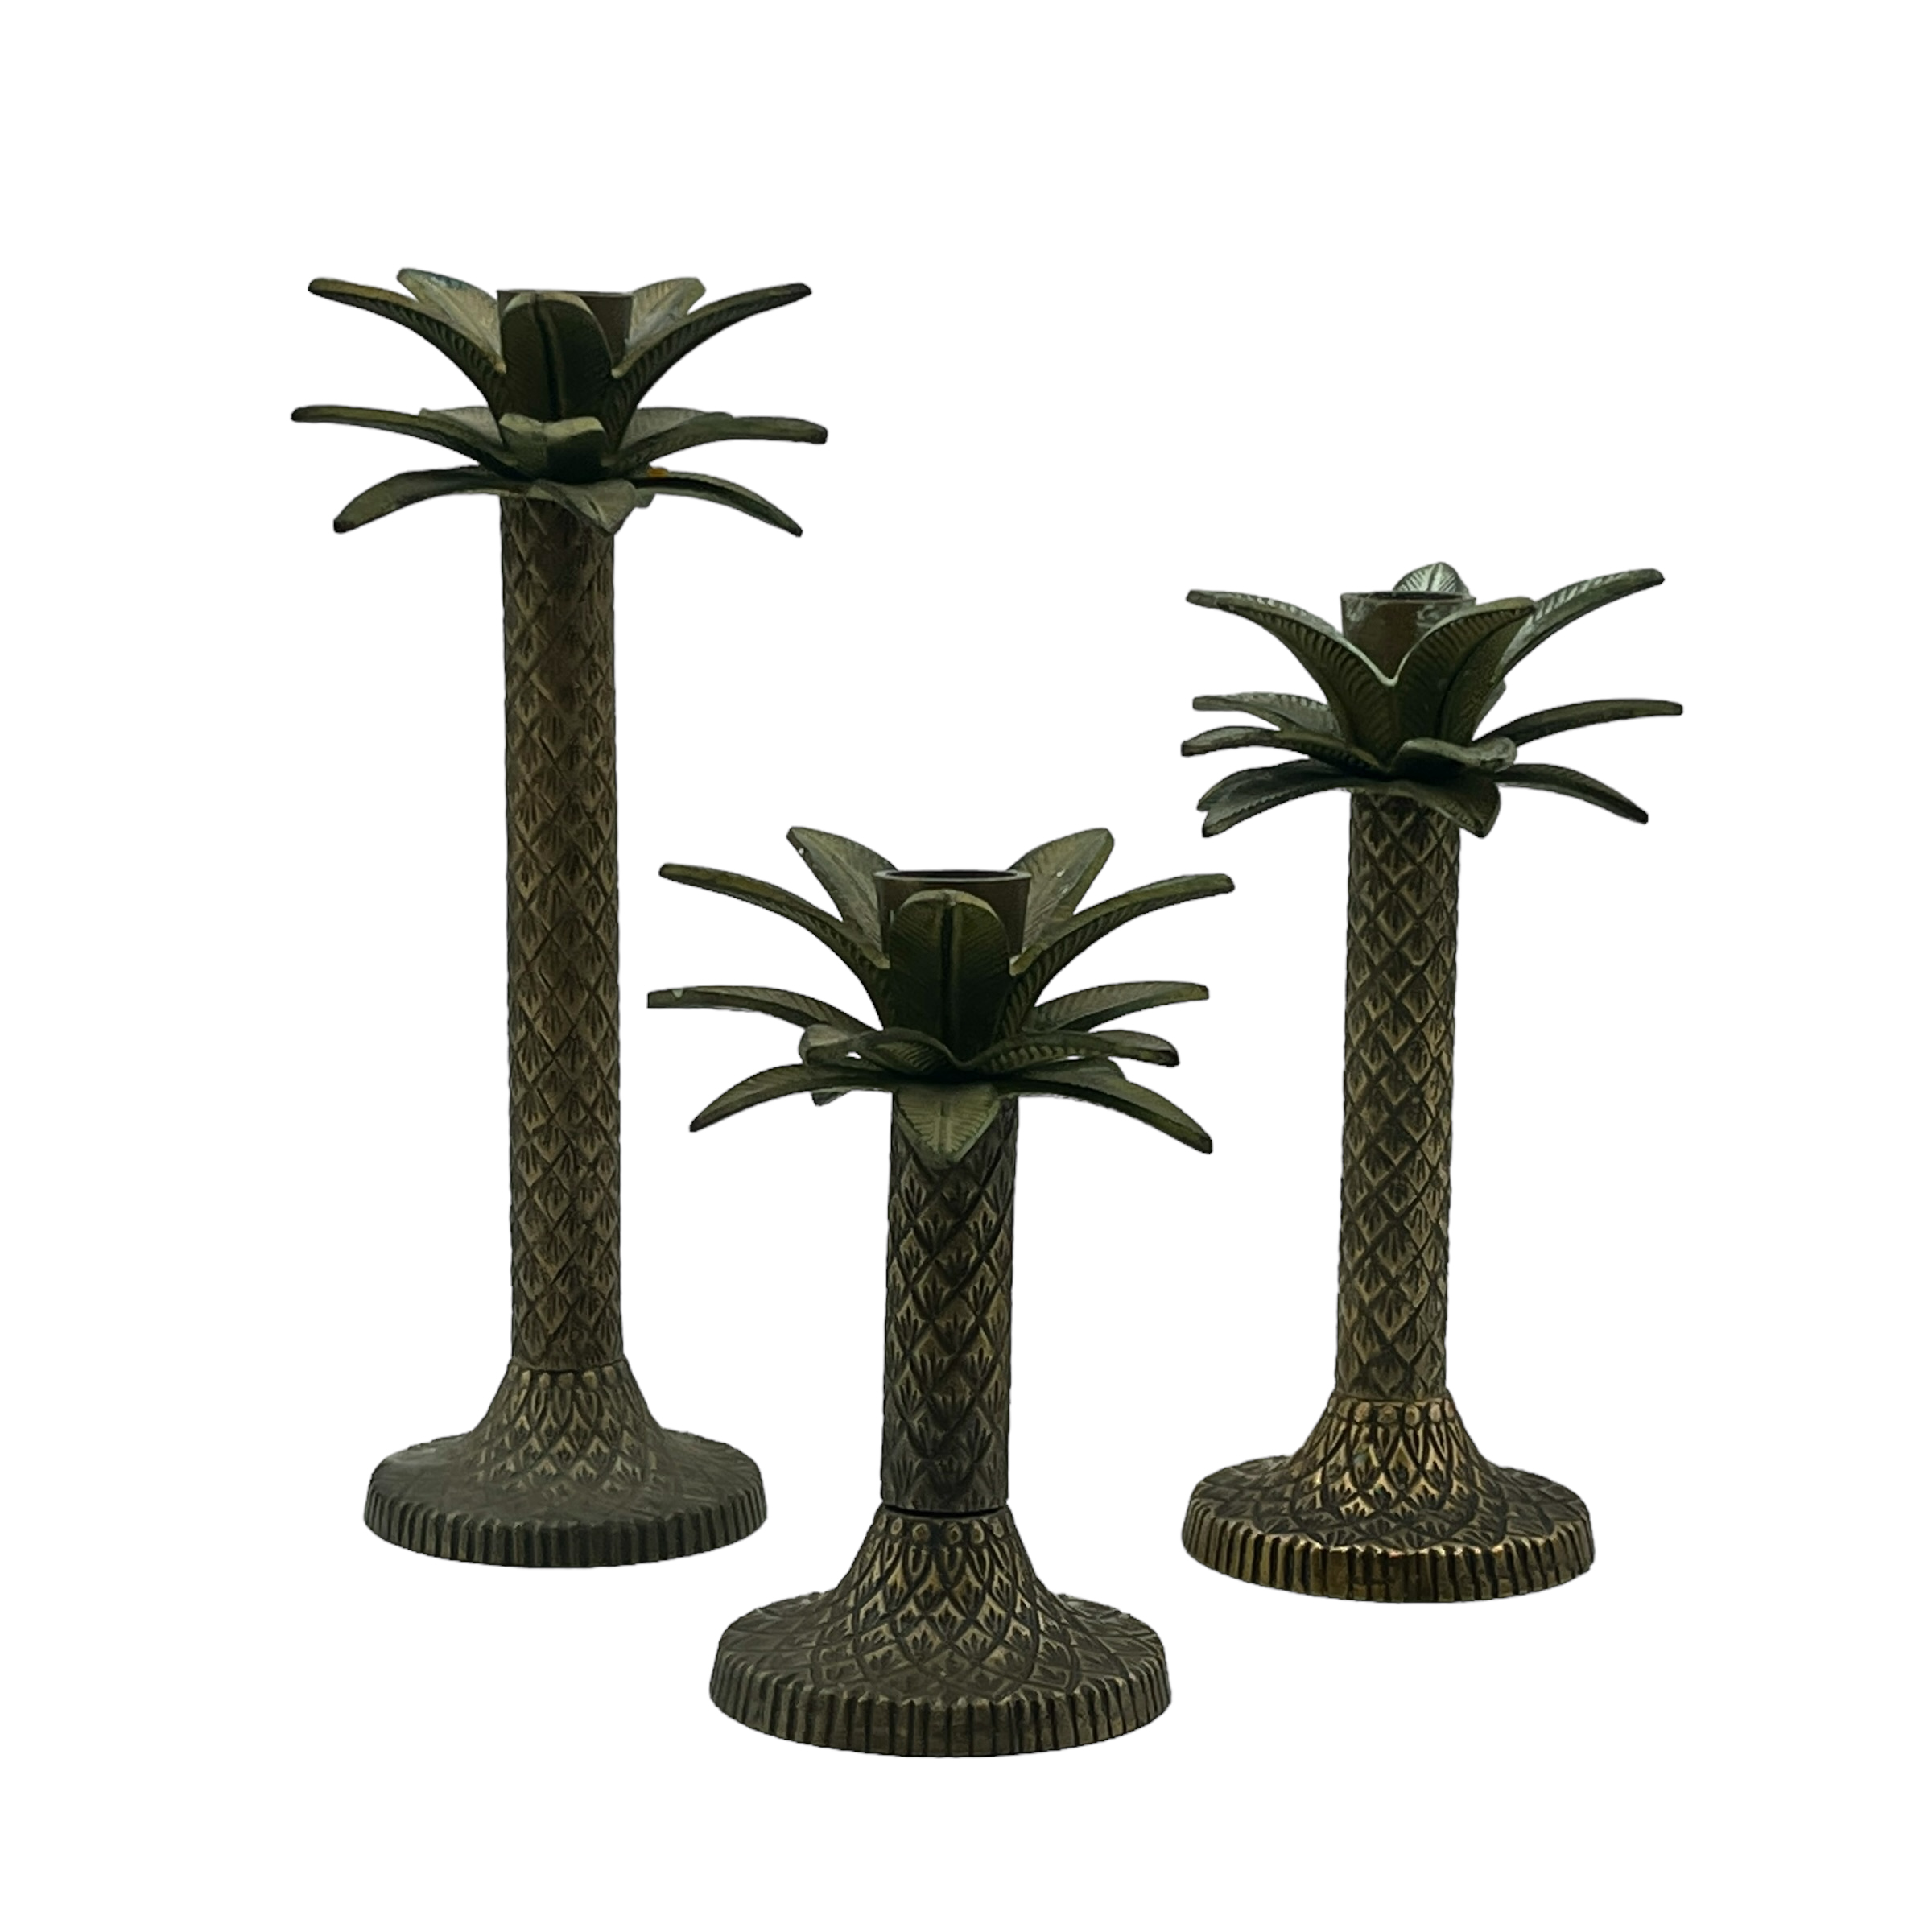 C. 1970s Palm Candle Holder Trio~P77669518